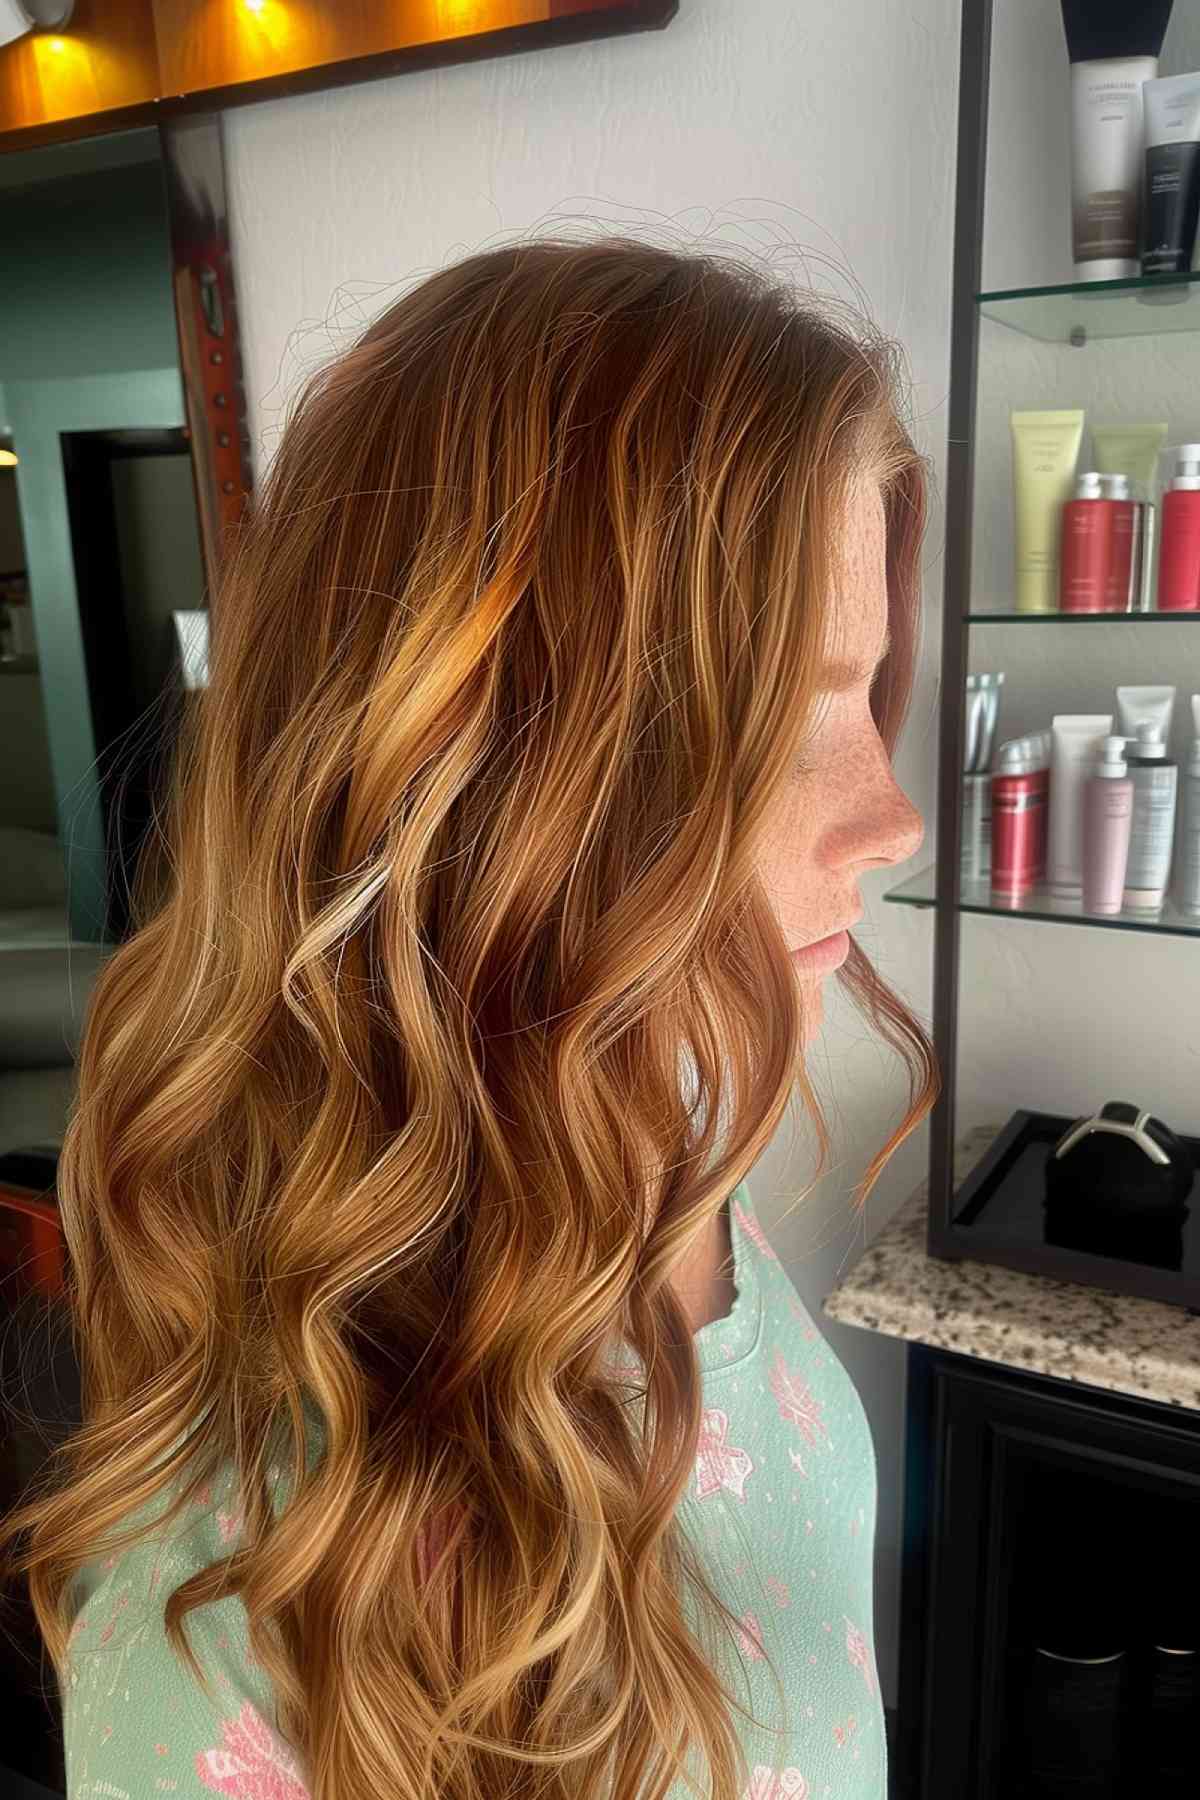 Long Golden Ginger Curled Hair with Highlights